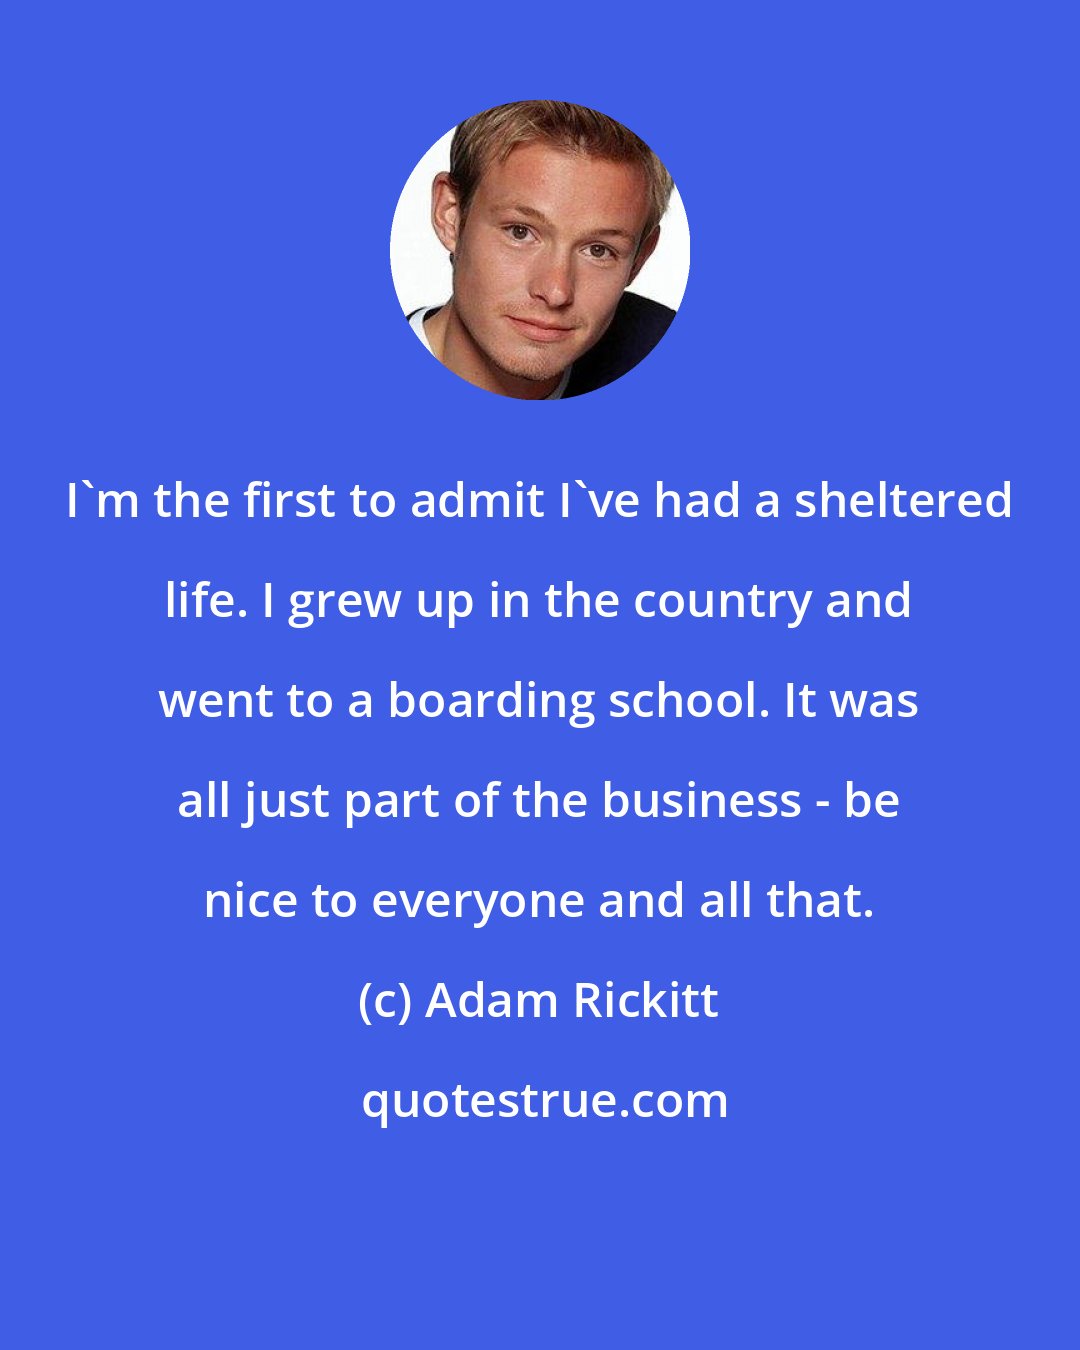 Adam Rickitt: I'm the first to admit I've had a sheltered life. I grew up in the country and went to a boarding school. It was all just part of the business - be nice to everyone and all that.